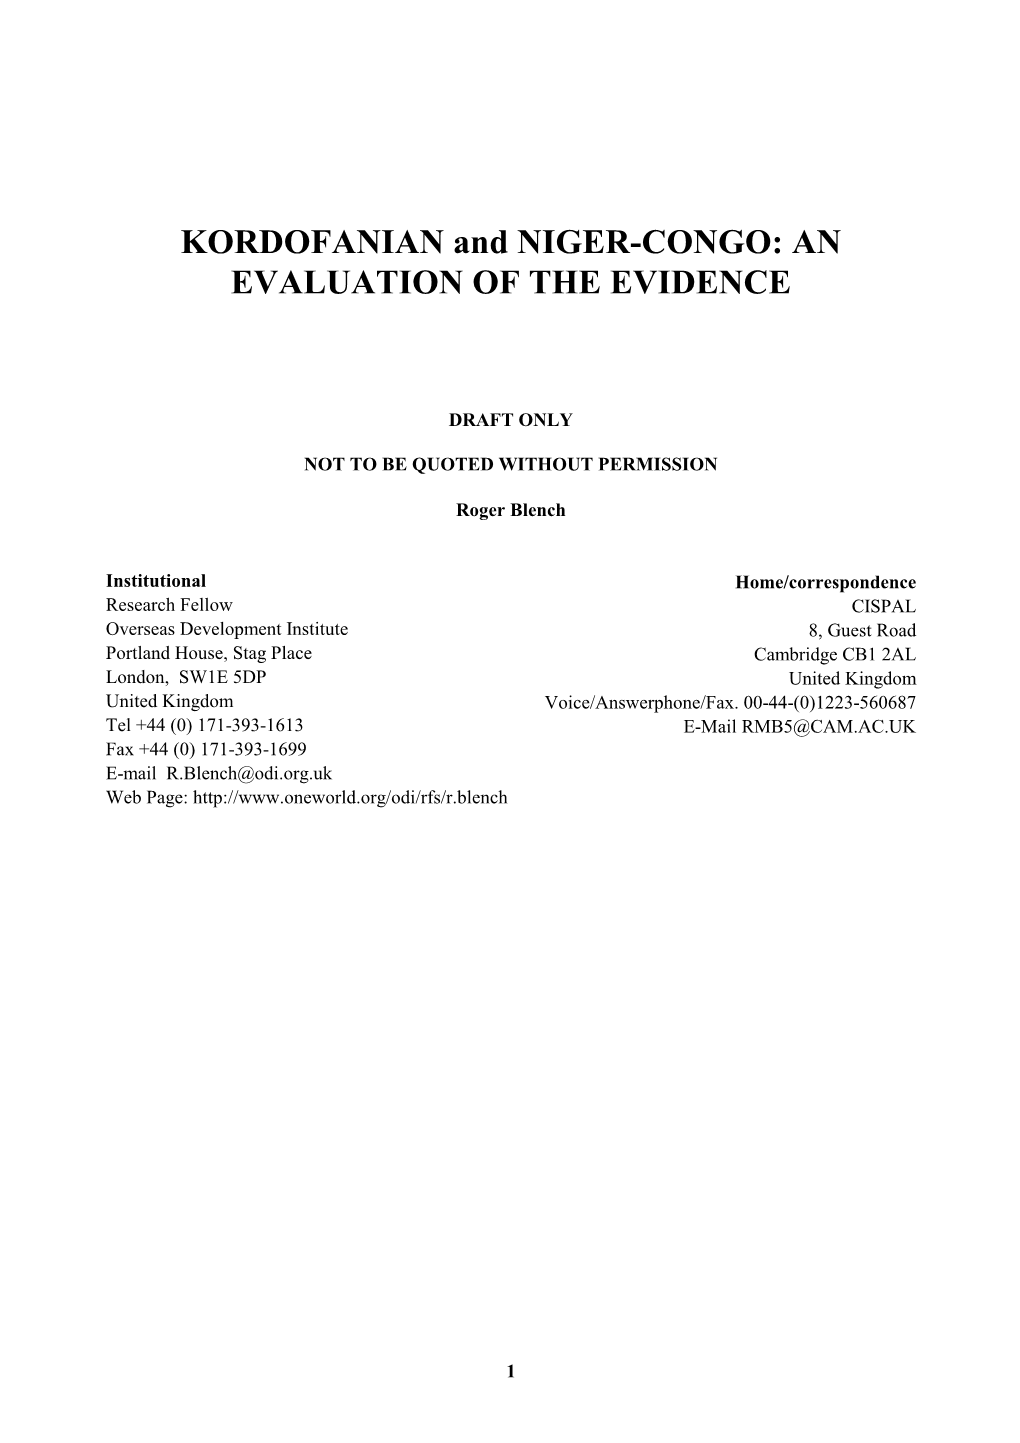 KORDOFANIAN and NIGER-CONGO: an EVALUATION of the EVIDENCE